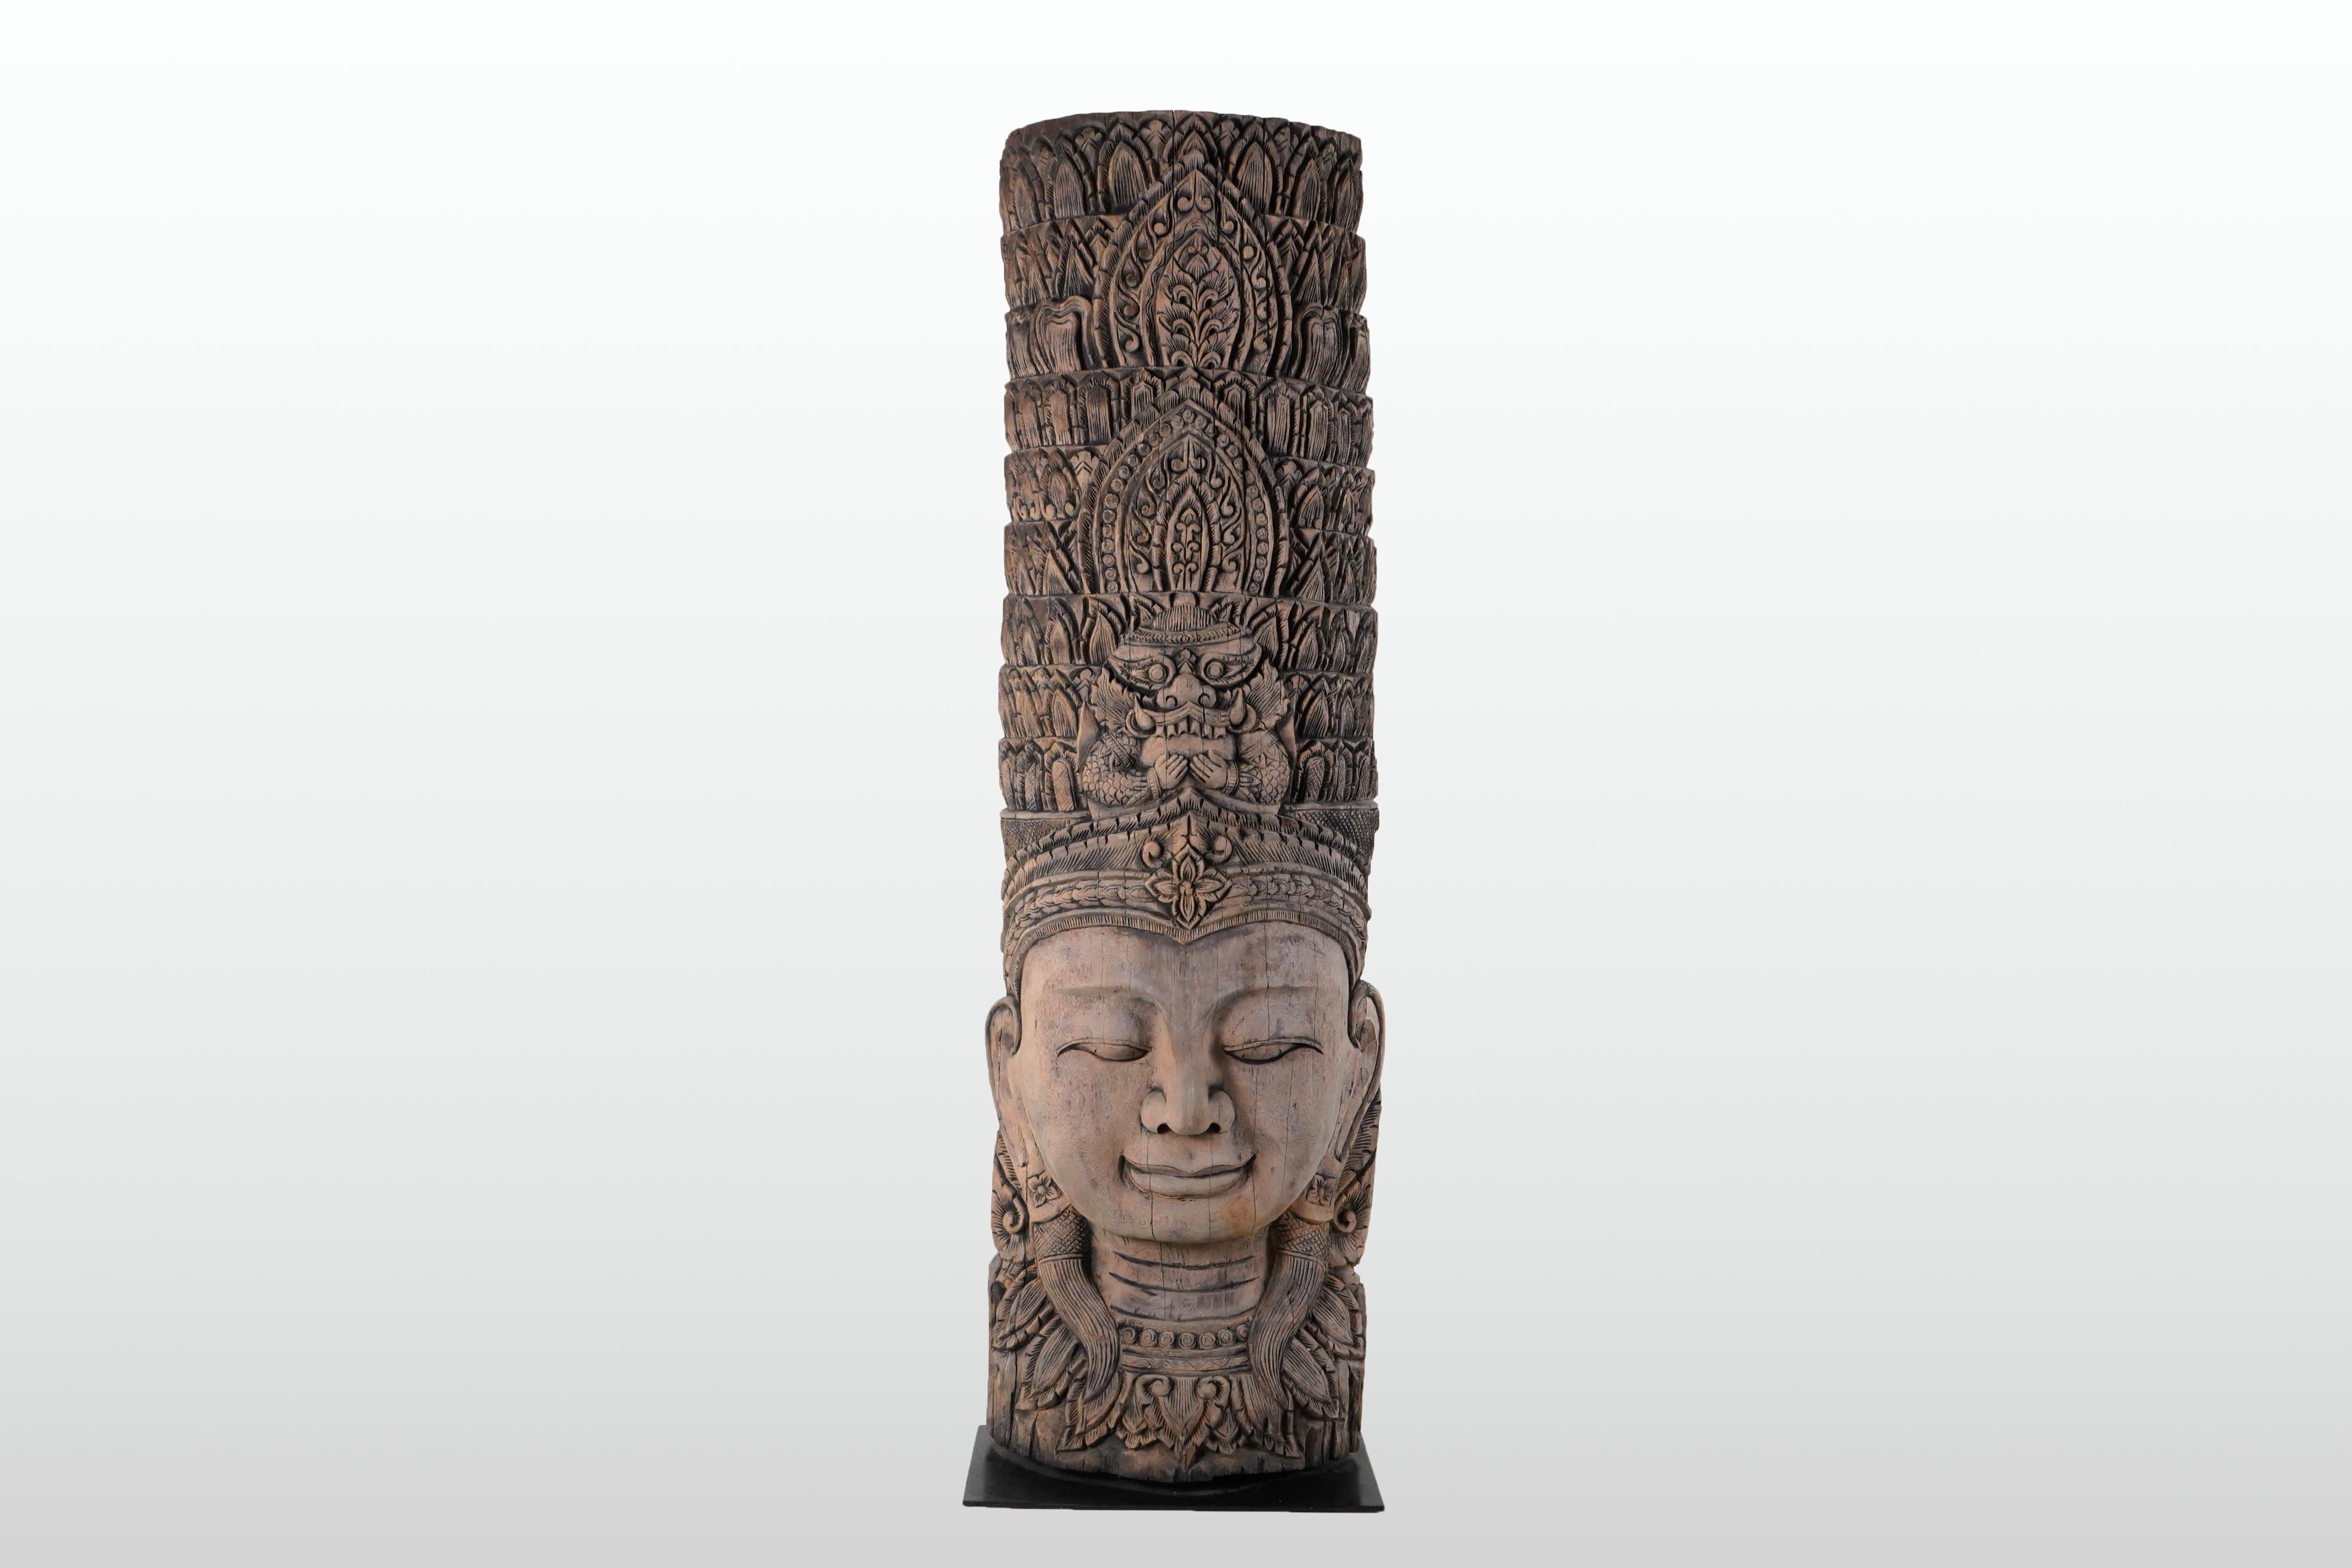 Newly carved from reclaimed teakwood, this bust takes the form of a Cambodian apsara. With origins in Hindu and Buddhist mythology, Apsaras are female spirits of the clouds and waters. They are also referred to as 